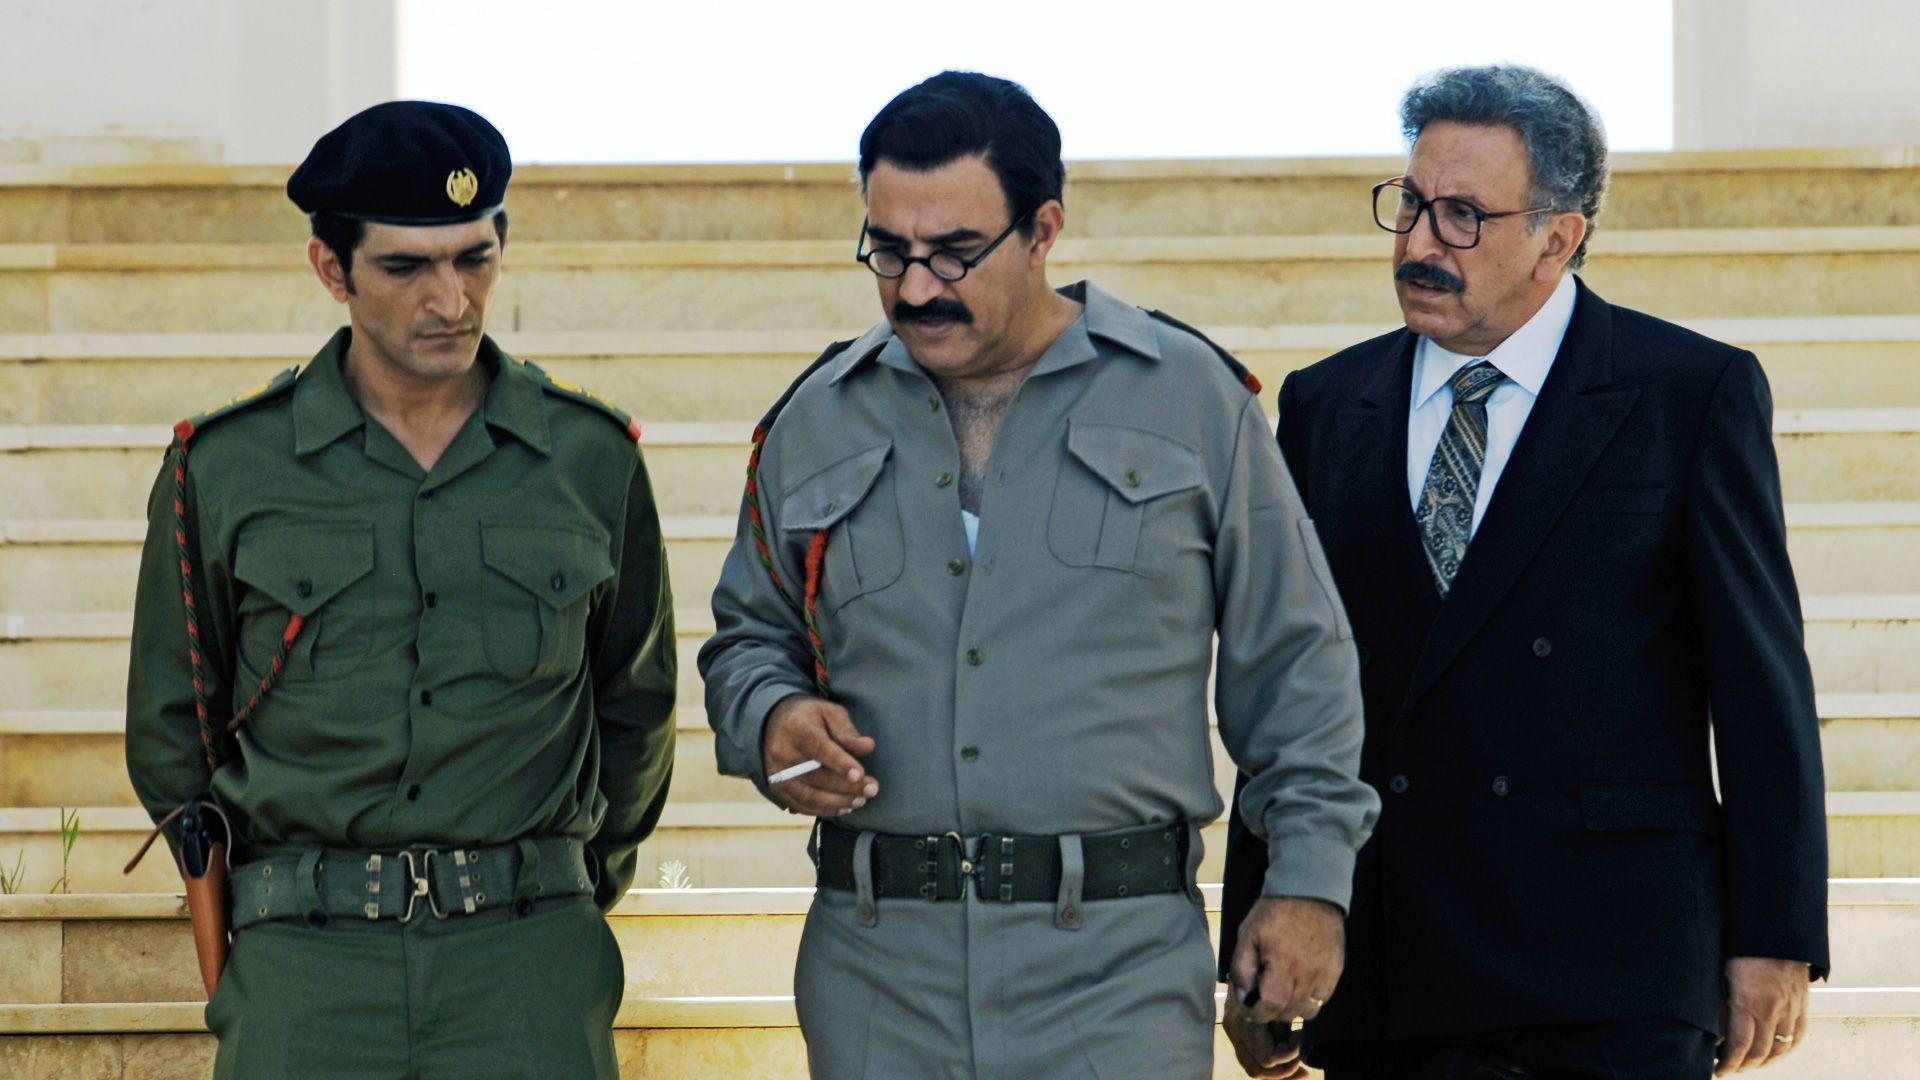 From left to right: Hussein Kamel, Saddam Hussein, and Tariq Aziz